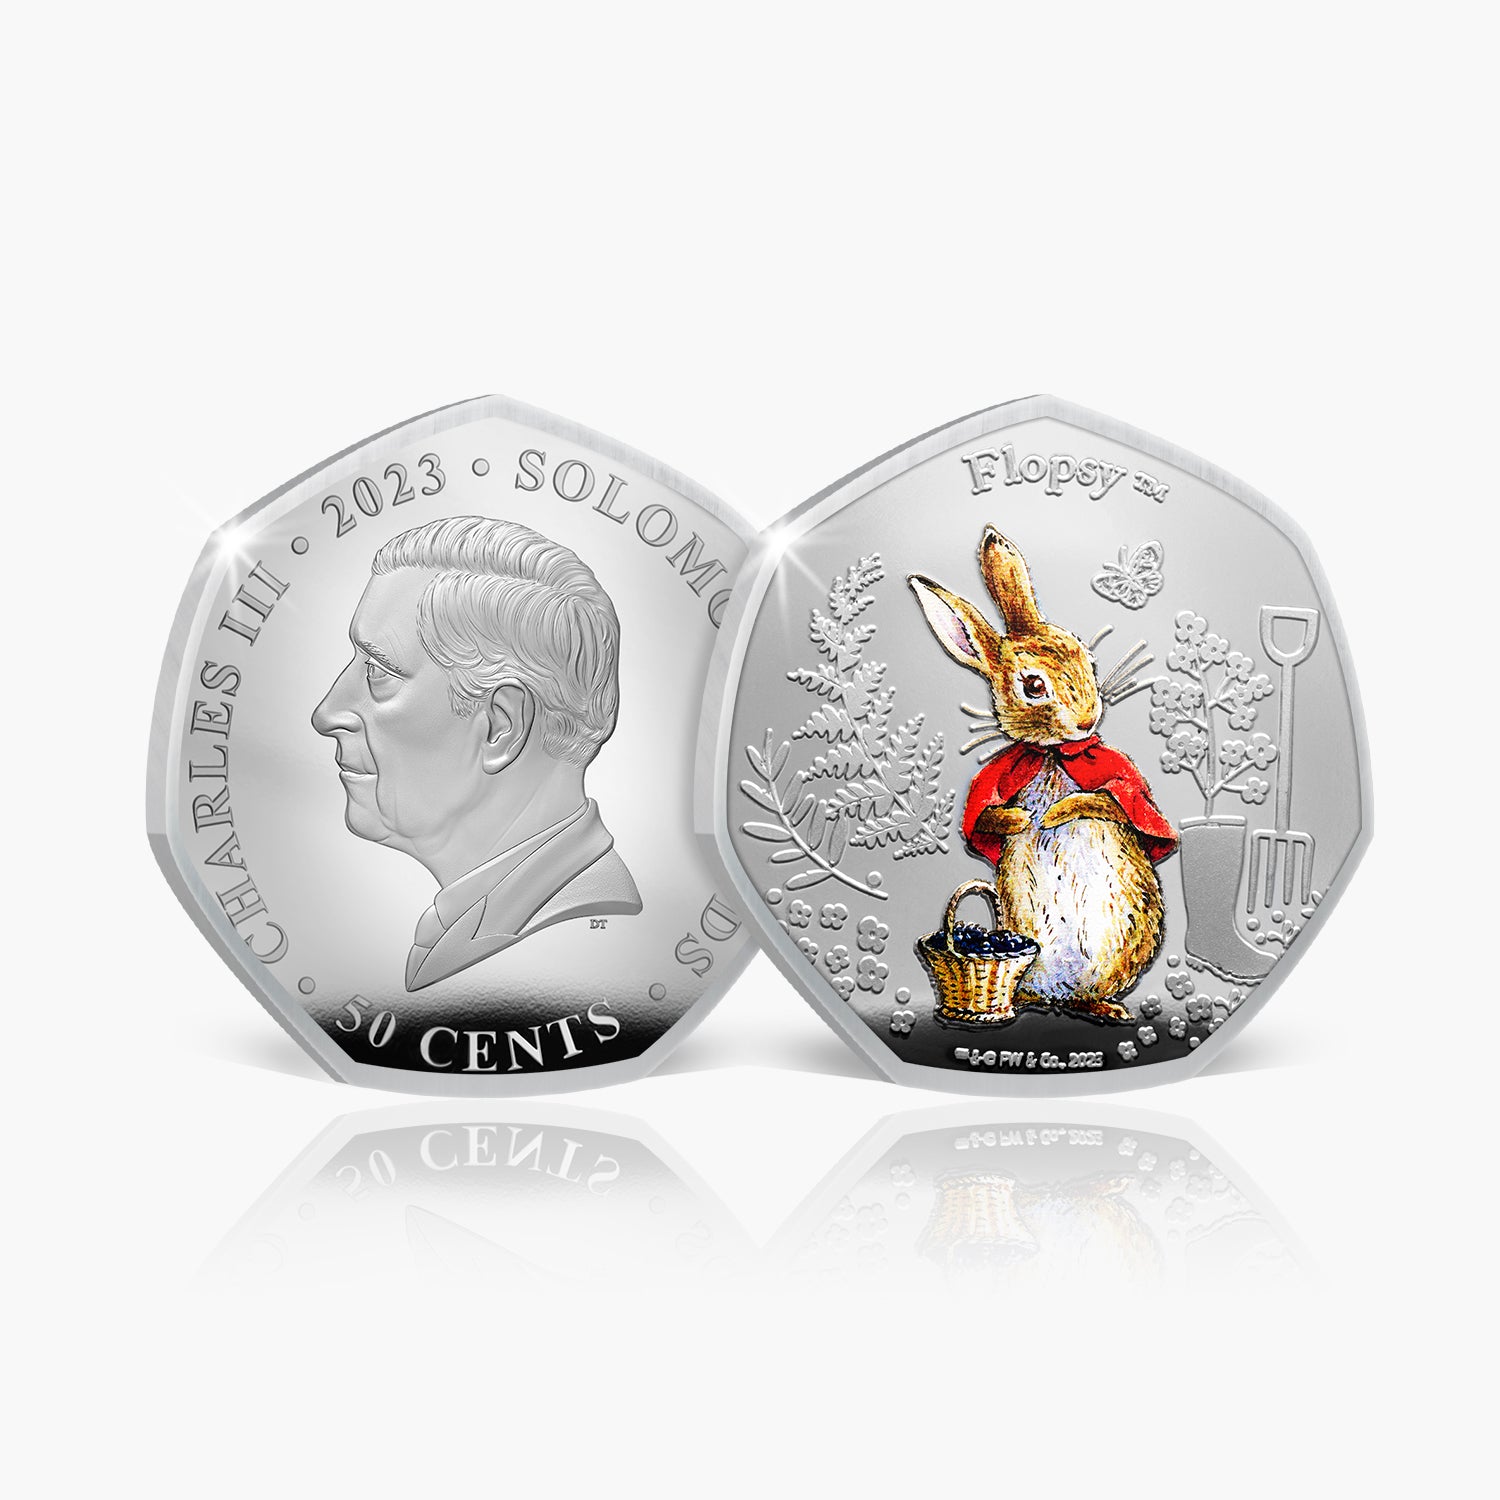 The World of Peter Rabbit 2023 Coin Collection - Flopsy Bunny Coin